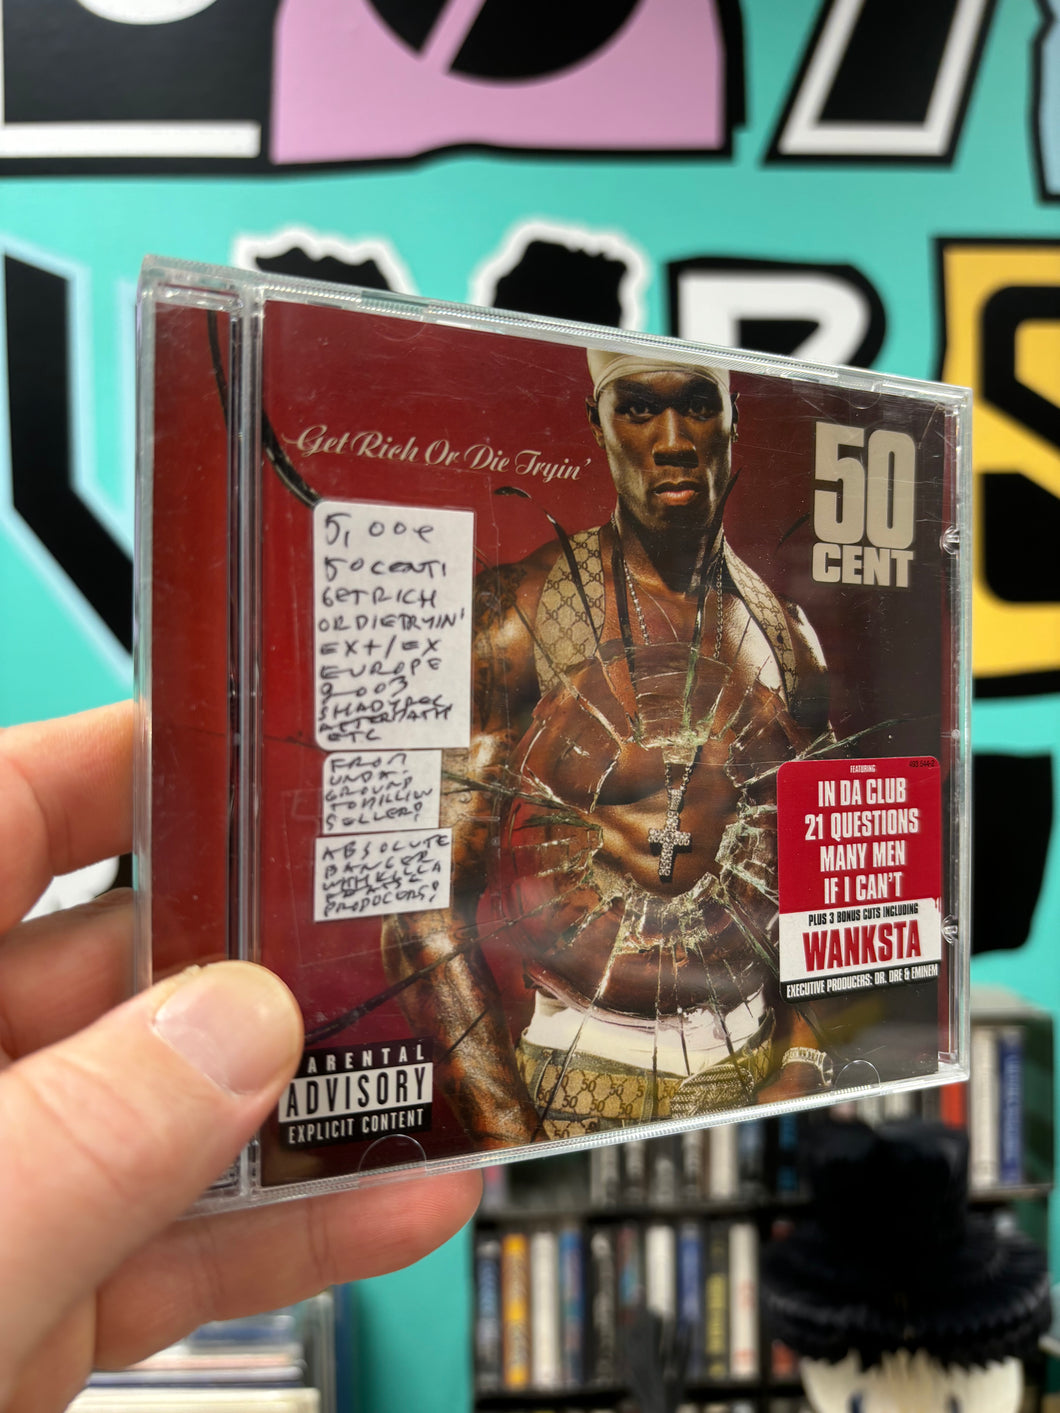 50 Cent: Get Rich Or Die Tryin’, CD, Europe 2003